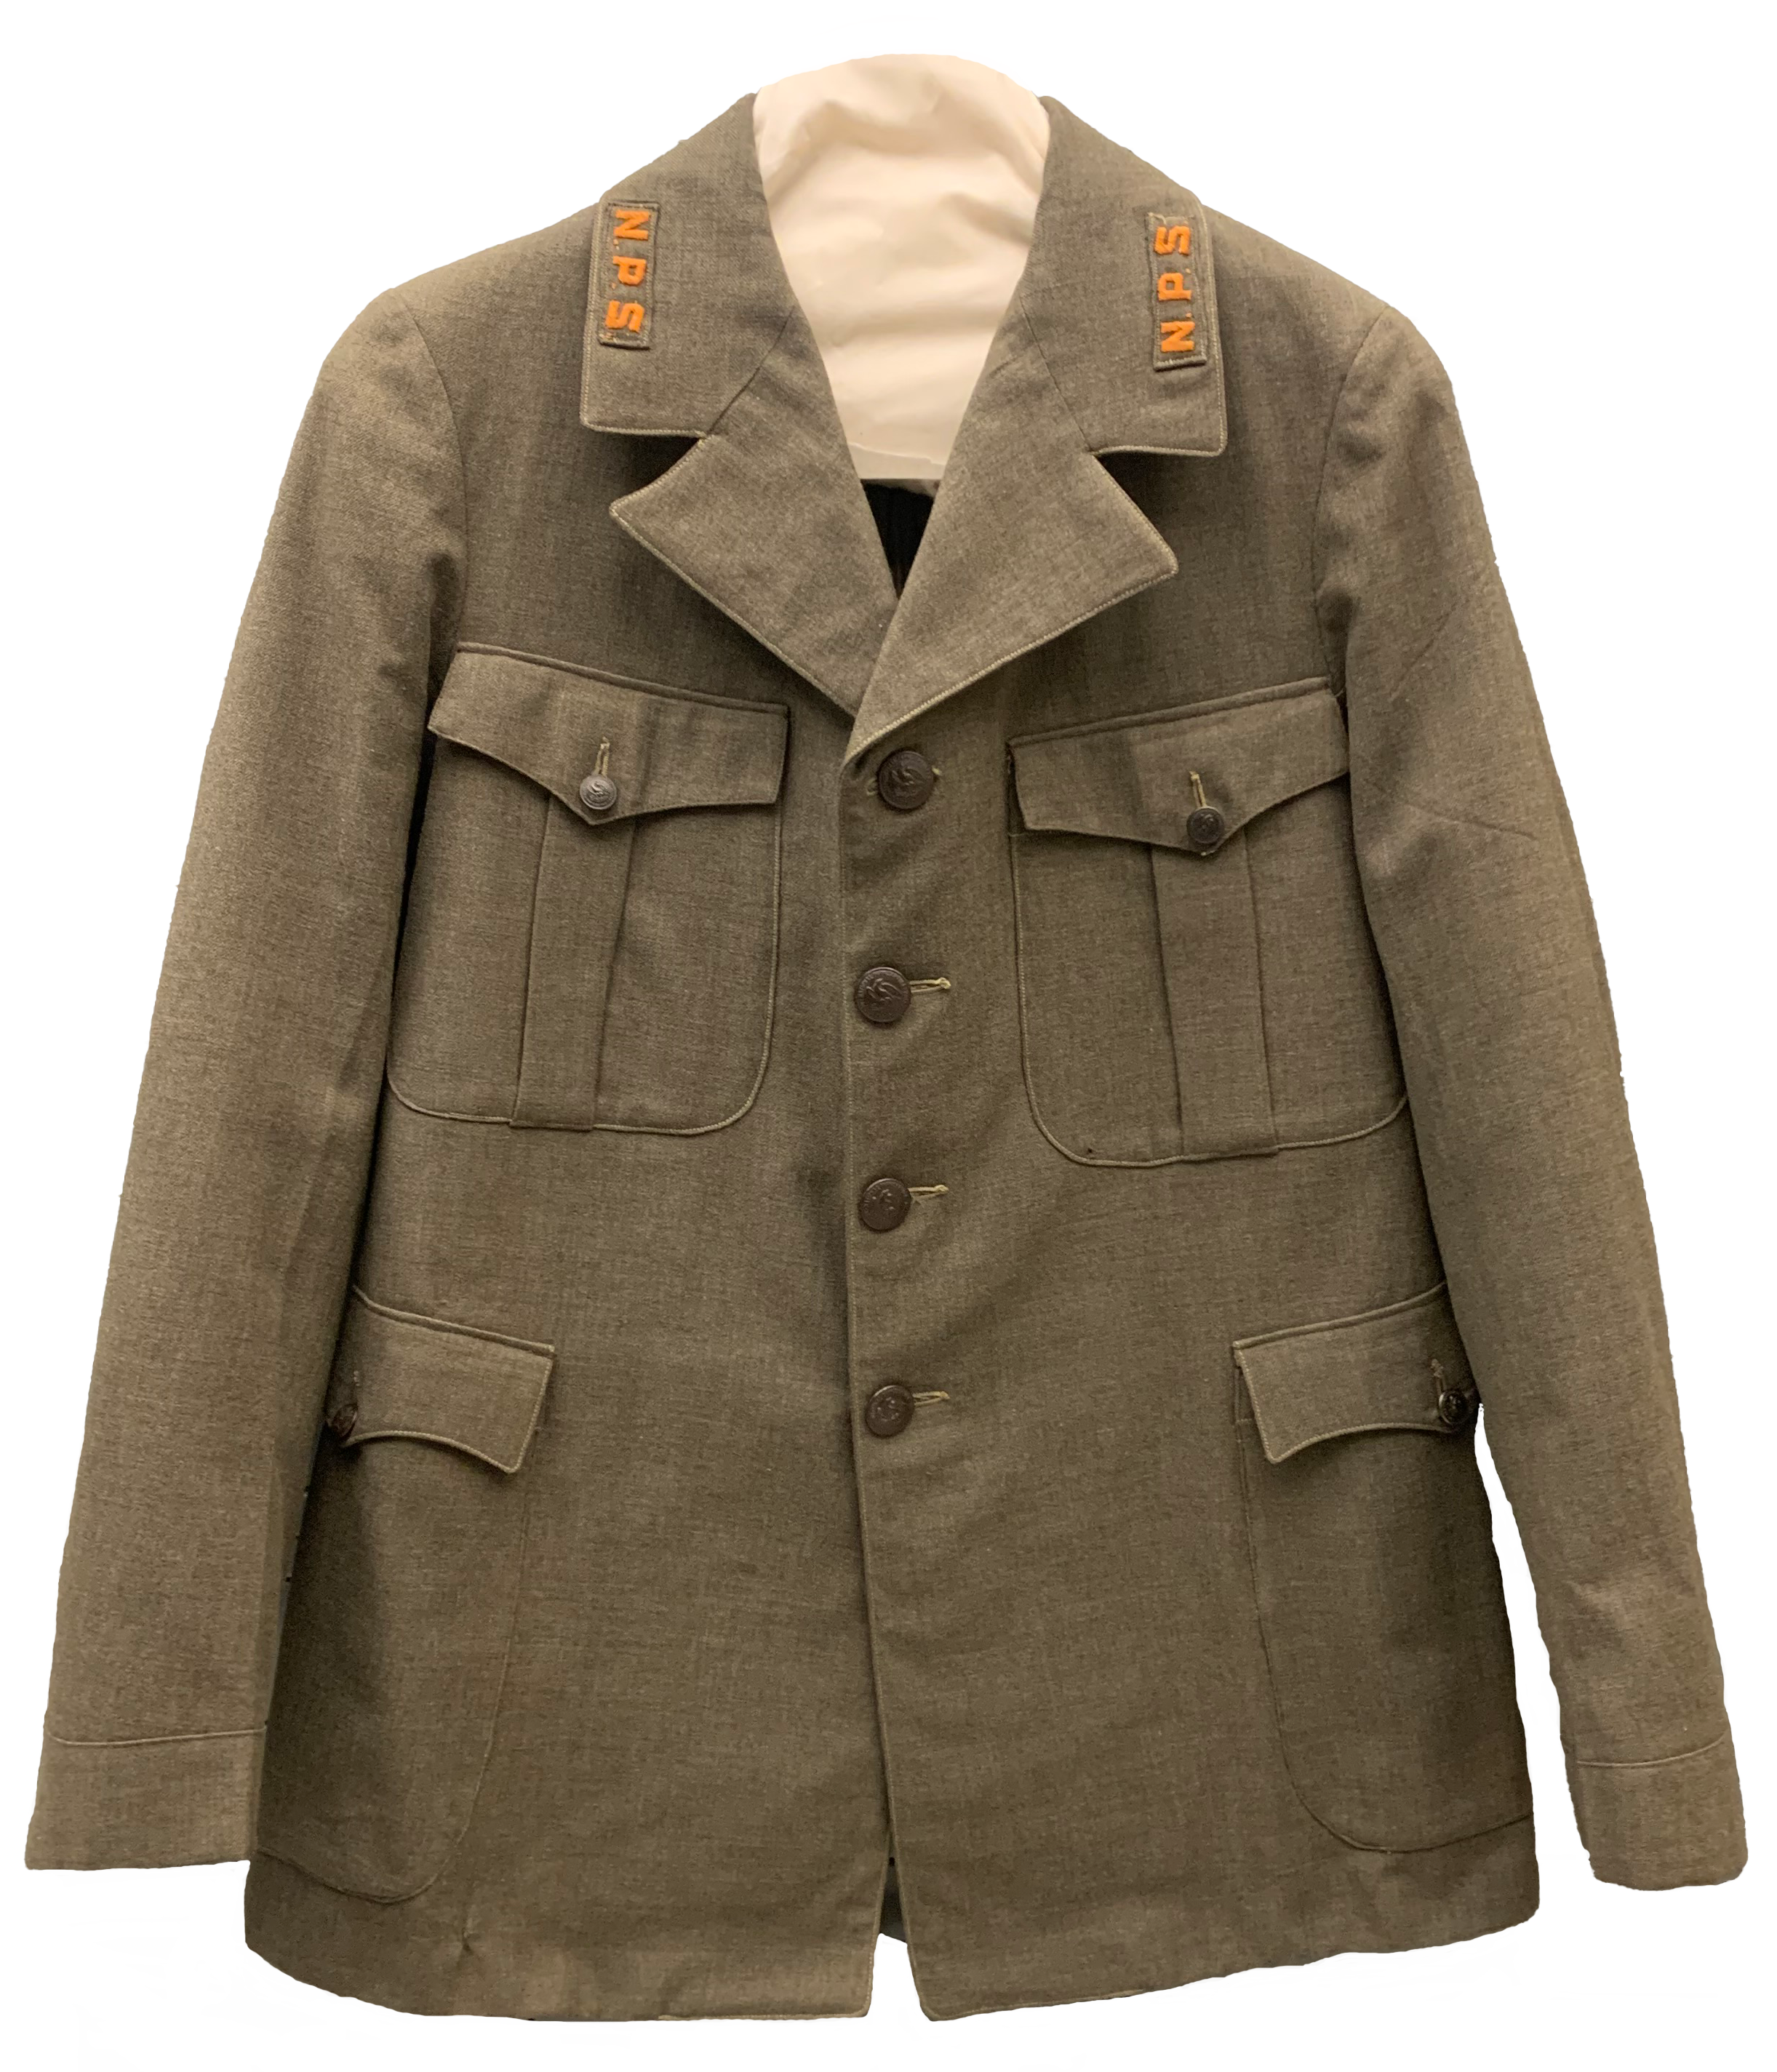 Green uniform with bronzed buttons down the front and on pockets with NPS embroidered on collars on a hanger